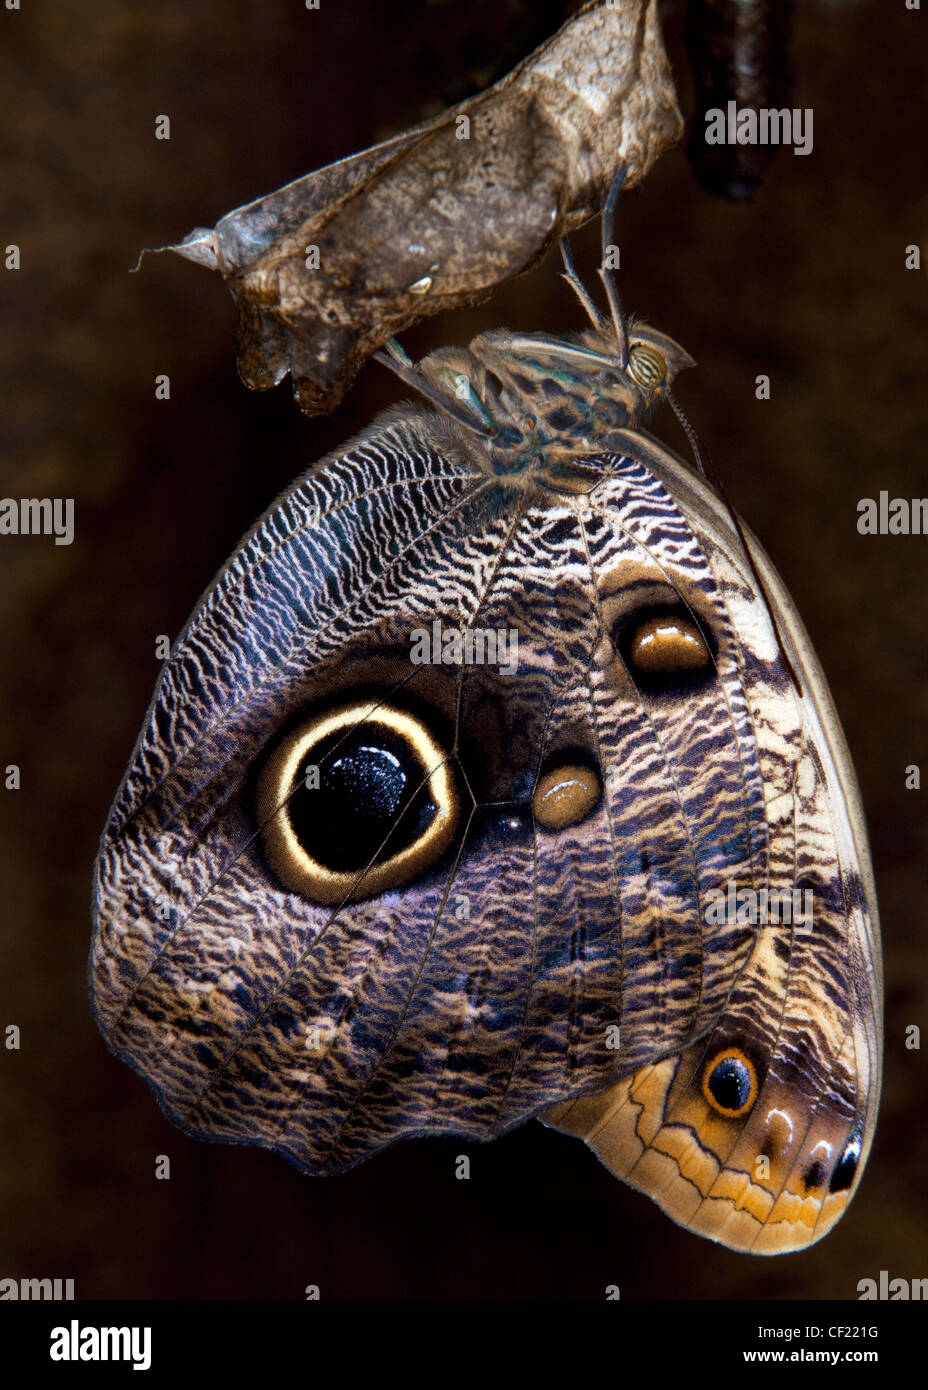 Blue Morpho Butterfly Emerging From Chrysalis. Stock Photo